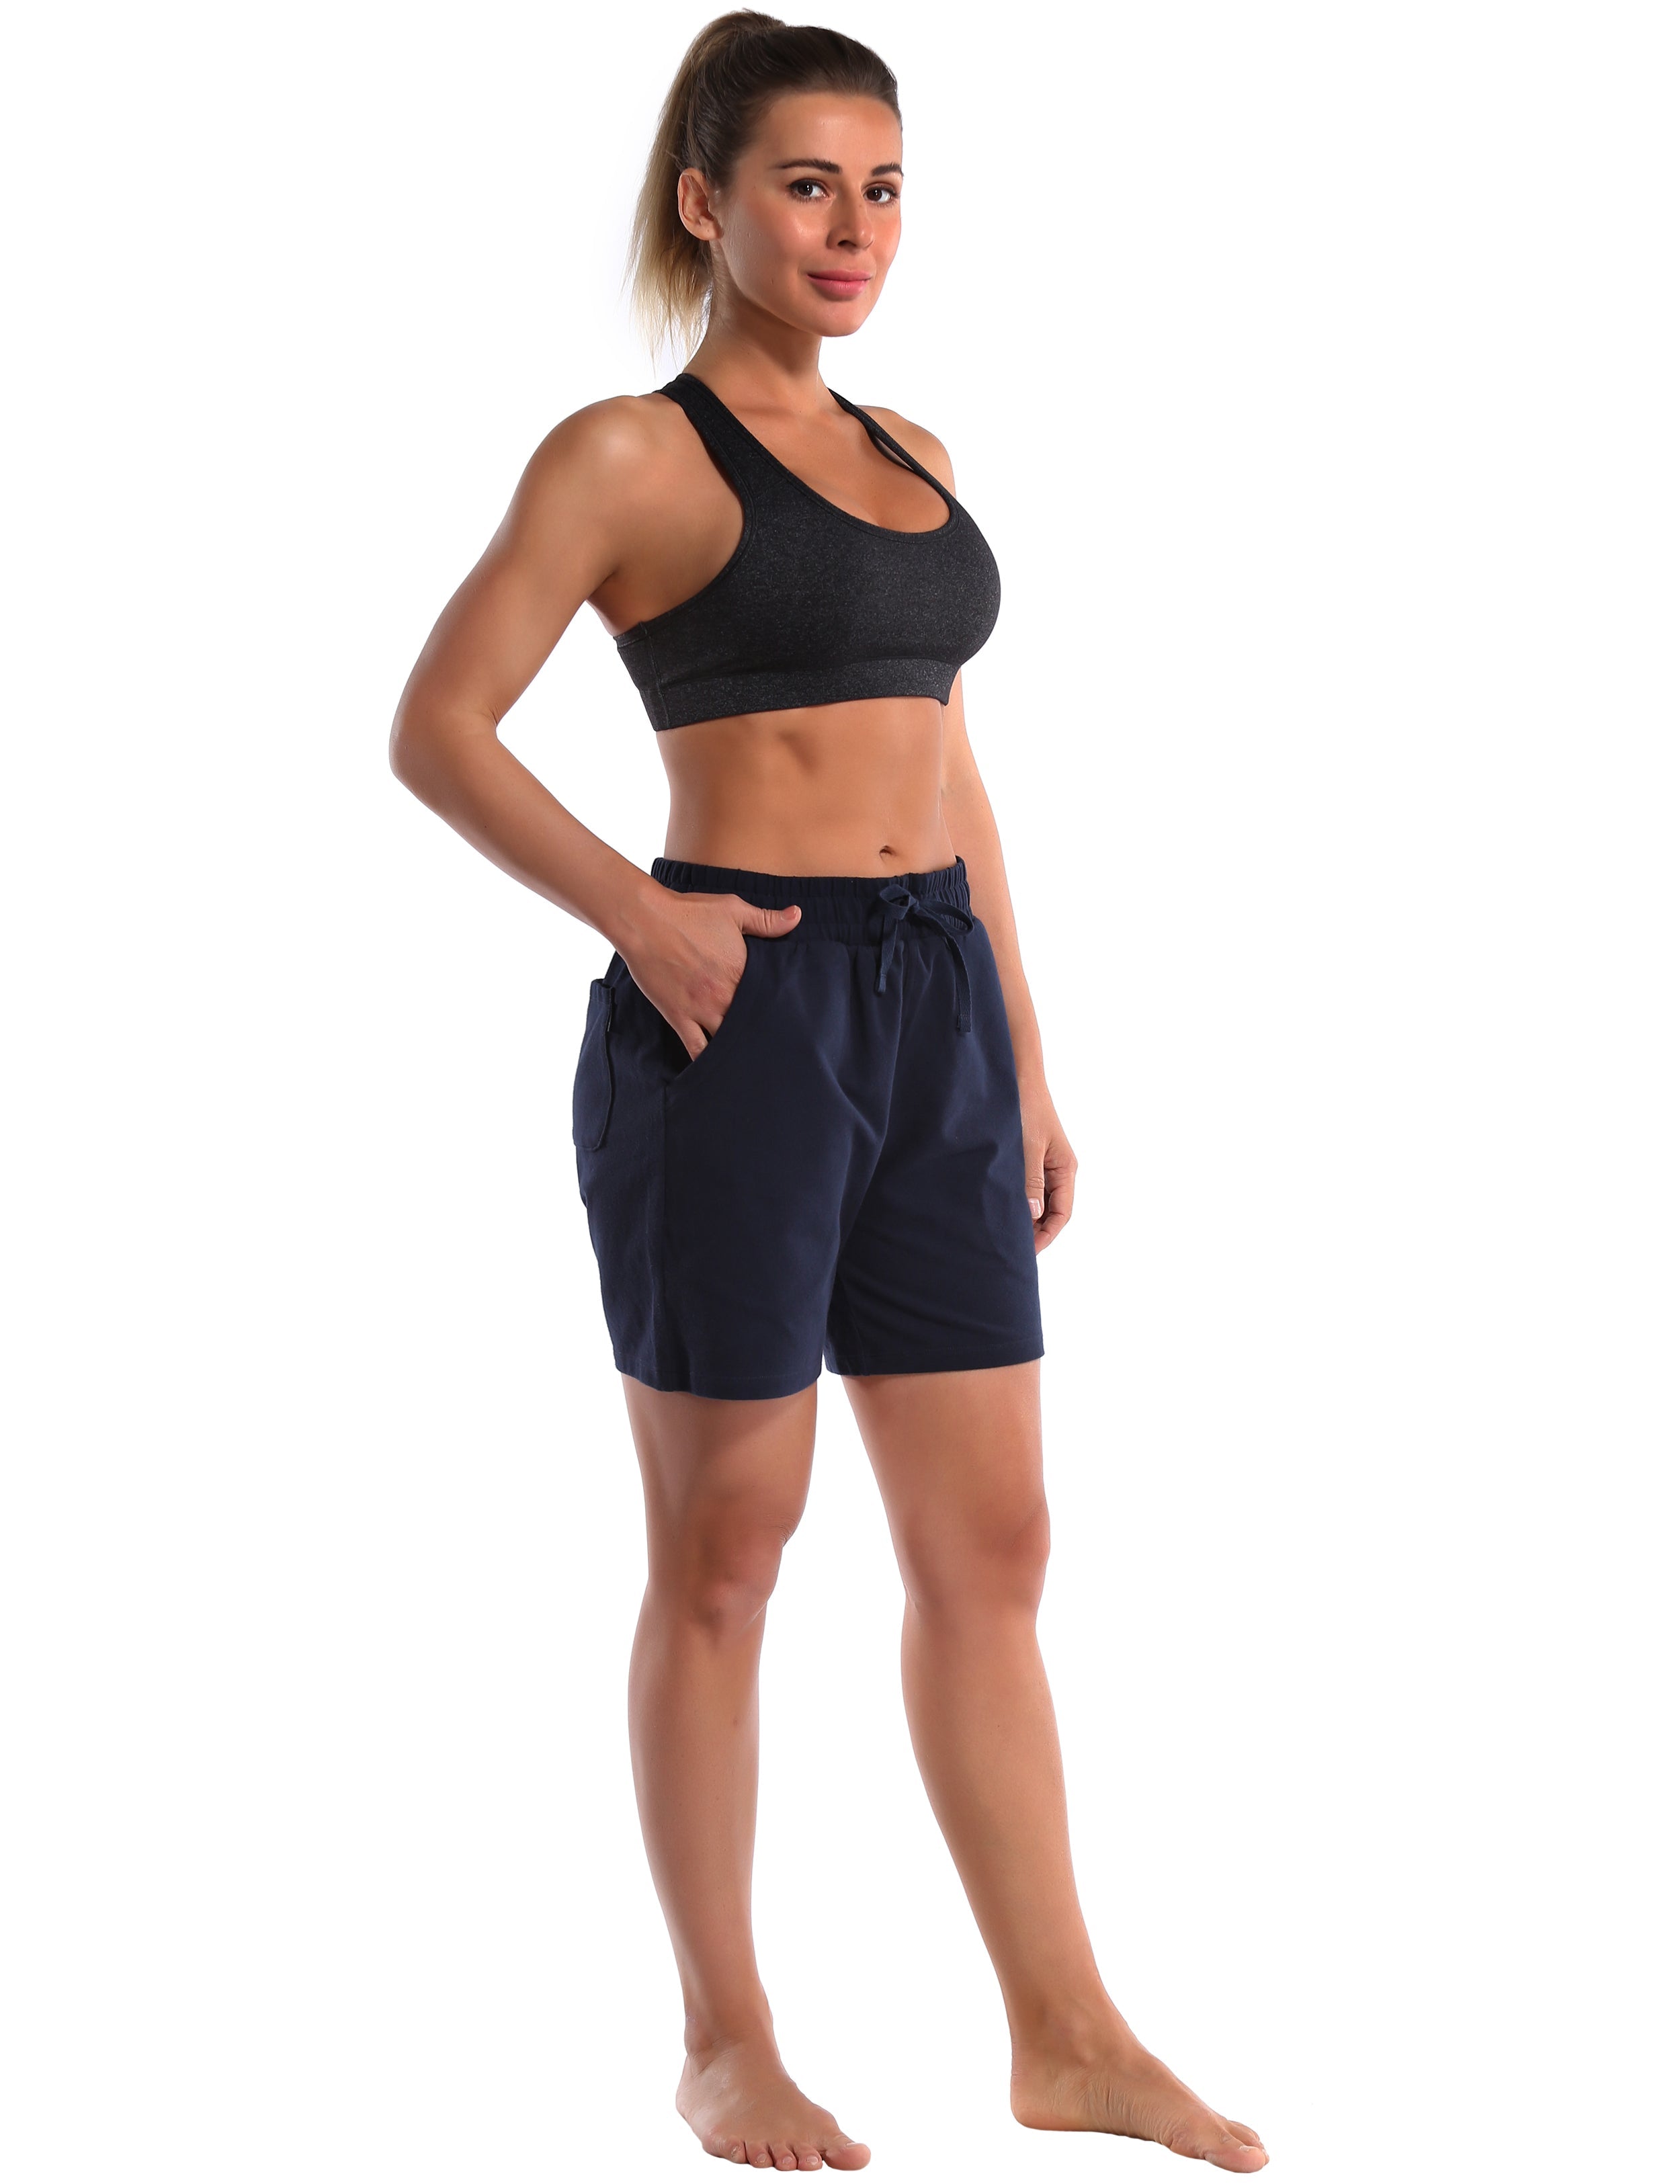 5" Joggers Shorts darknavy 90% Cotton, 10% Spandex Soft and Elastic Drawstring closure Lightweight & breathable fabric wicks away sweat to keep you comfortable Elastic waistband with internal drawcord for a snug, adjustable fit Big side pockets are available for 4.7", 5", 5.5" mobile phone Reflective logo helps you stand out in low light Perfect for any types of outdoor exercises and indoor fitness,like yoga,running,walking,jogging,lounging,workout,gym fitness,casual use,etc